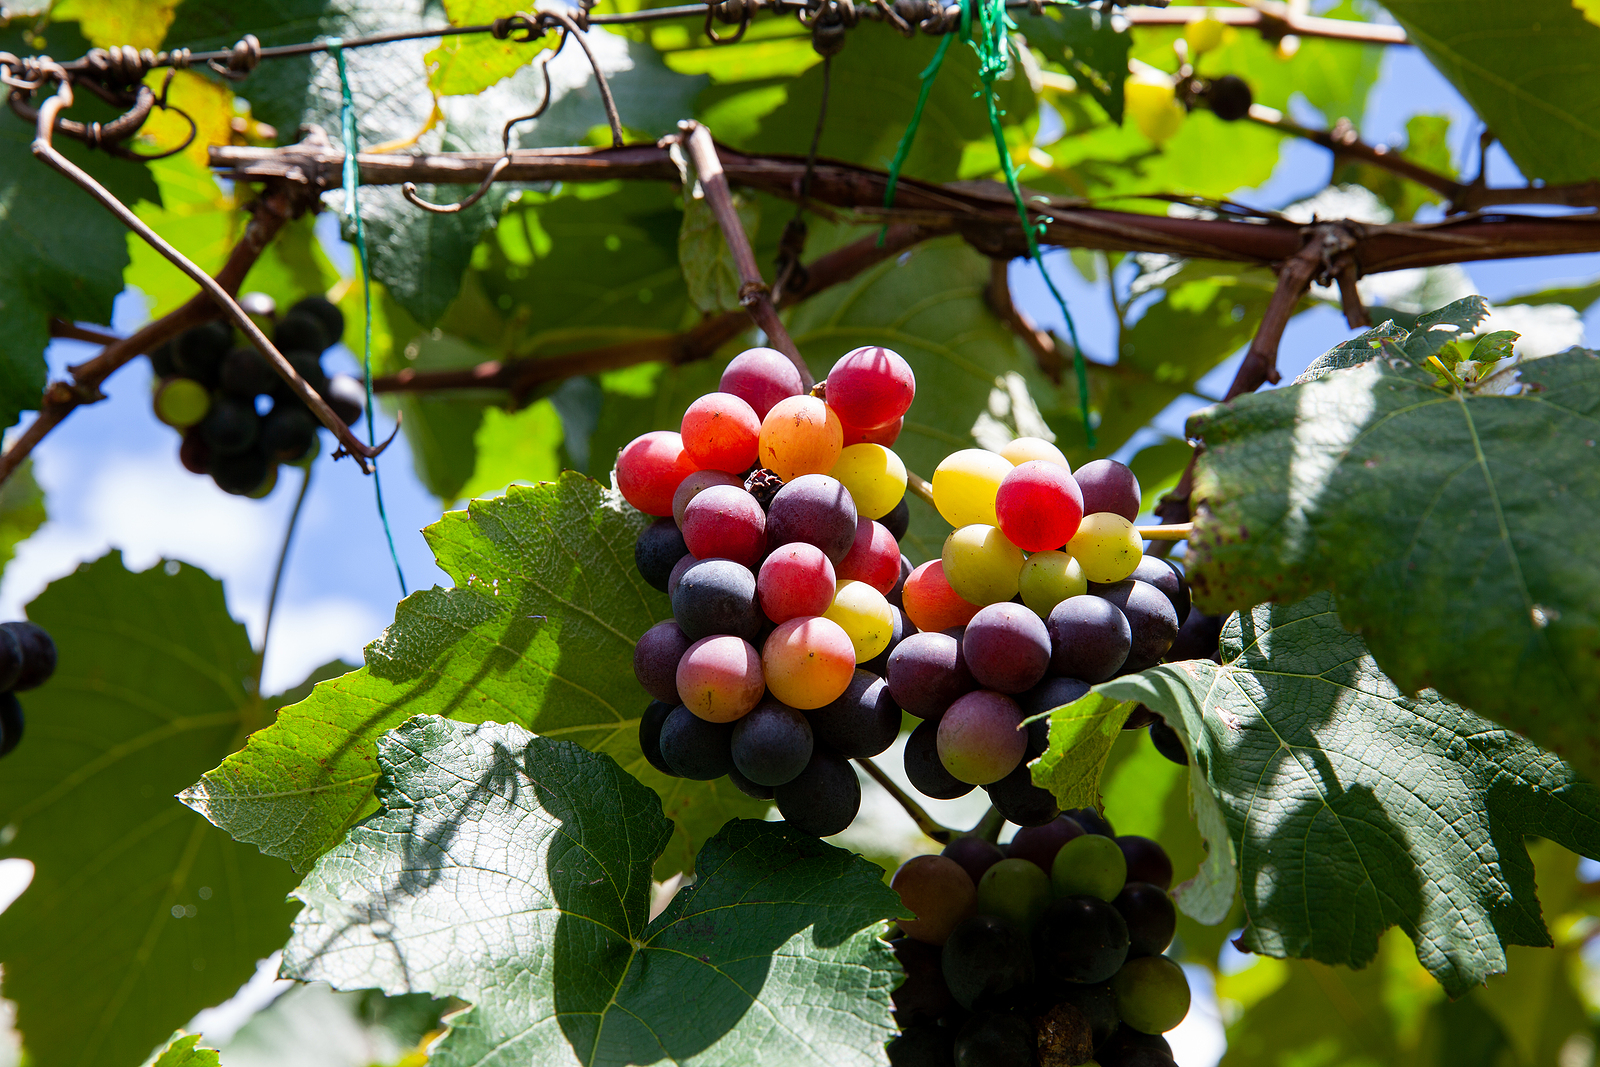 Grapevine - growing, caring for and harvesting grapes, varieties & pruning